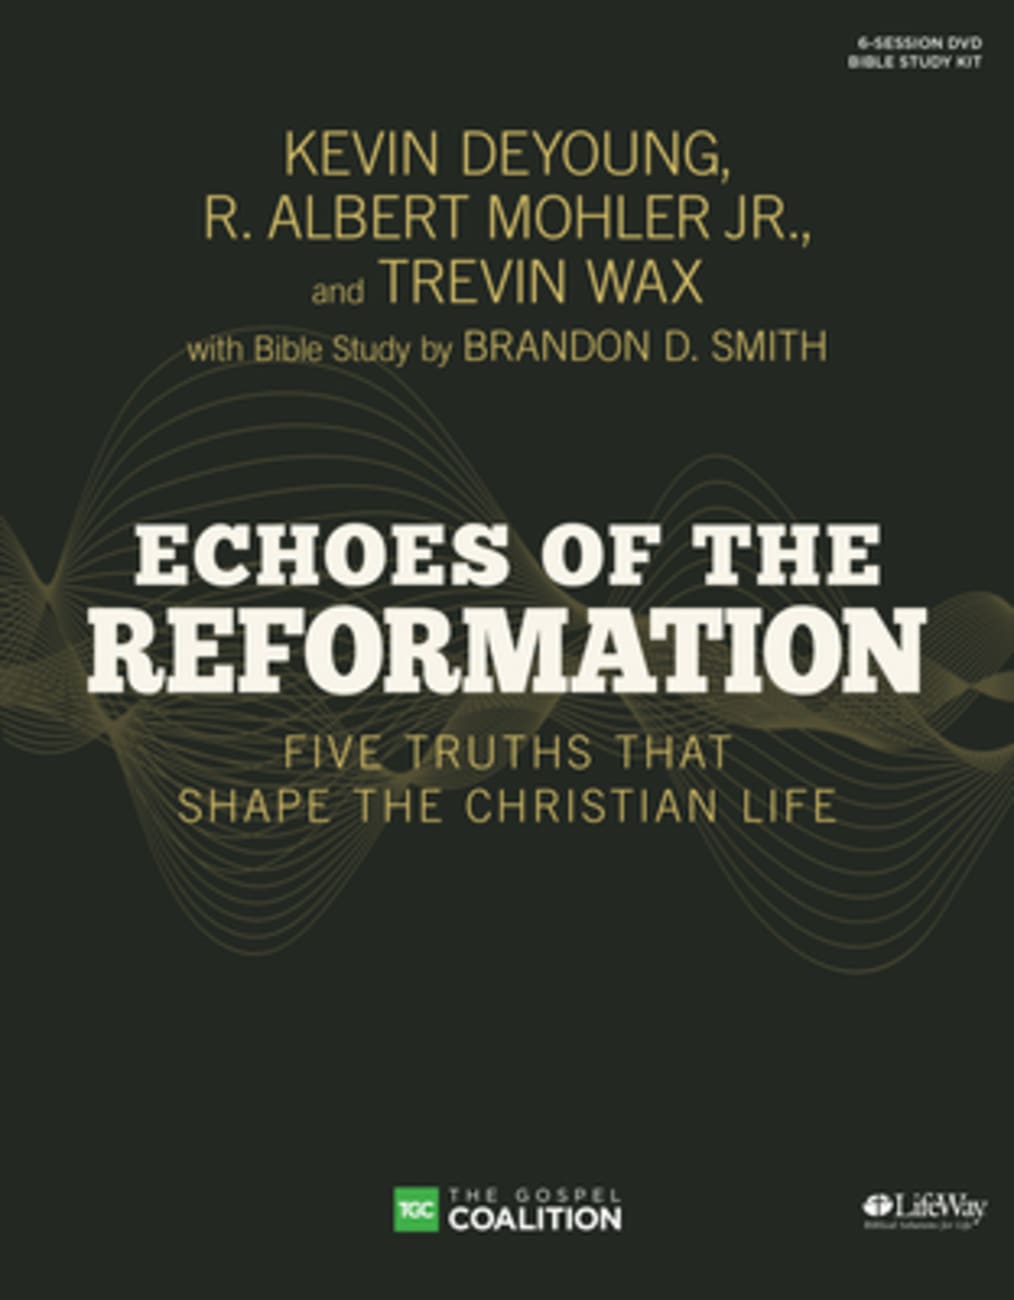 Echoes of the Reformation: Five Truths That Shape the Christian Life (Leader Kit) Pack/Kit